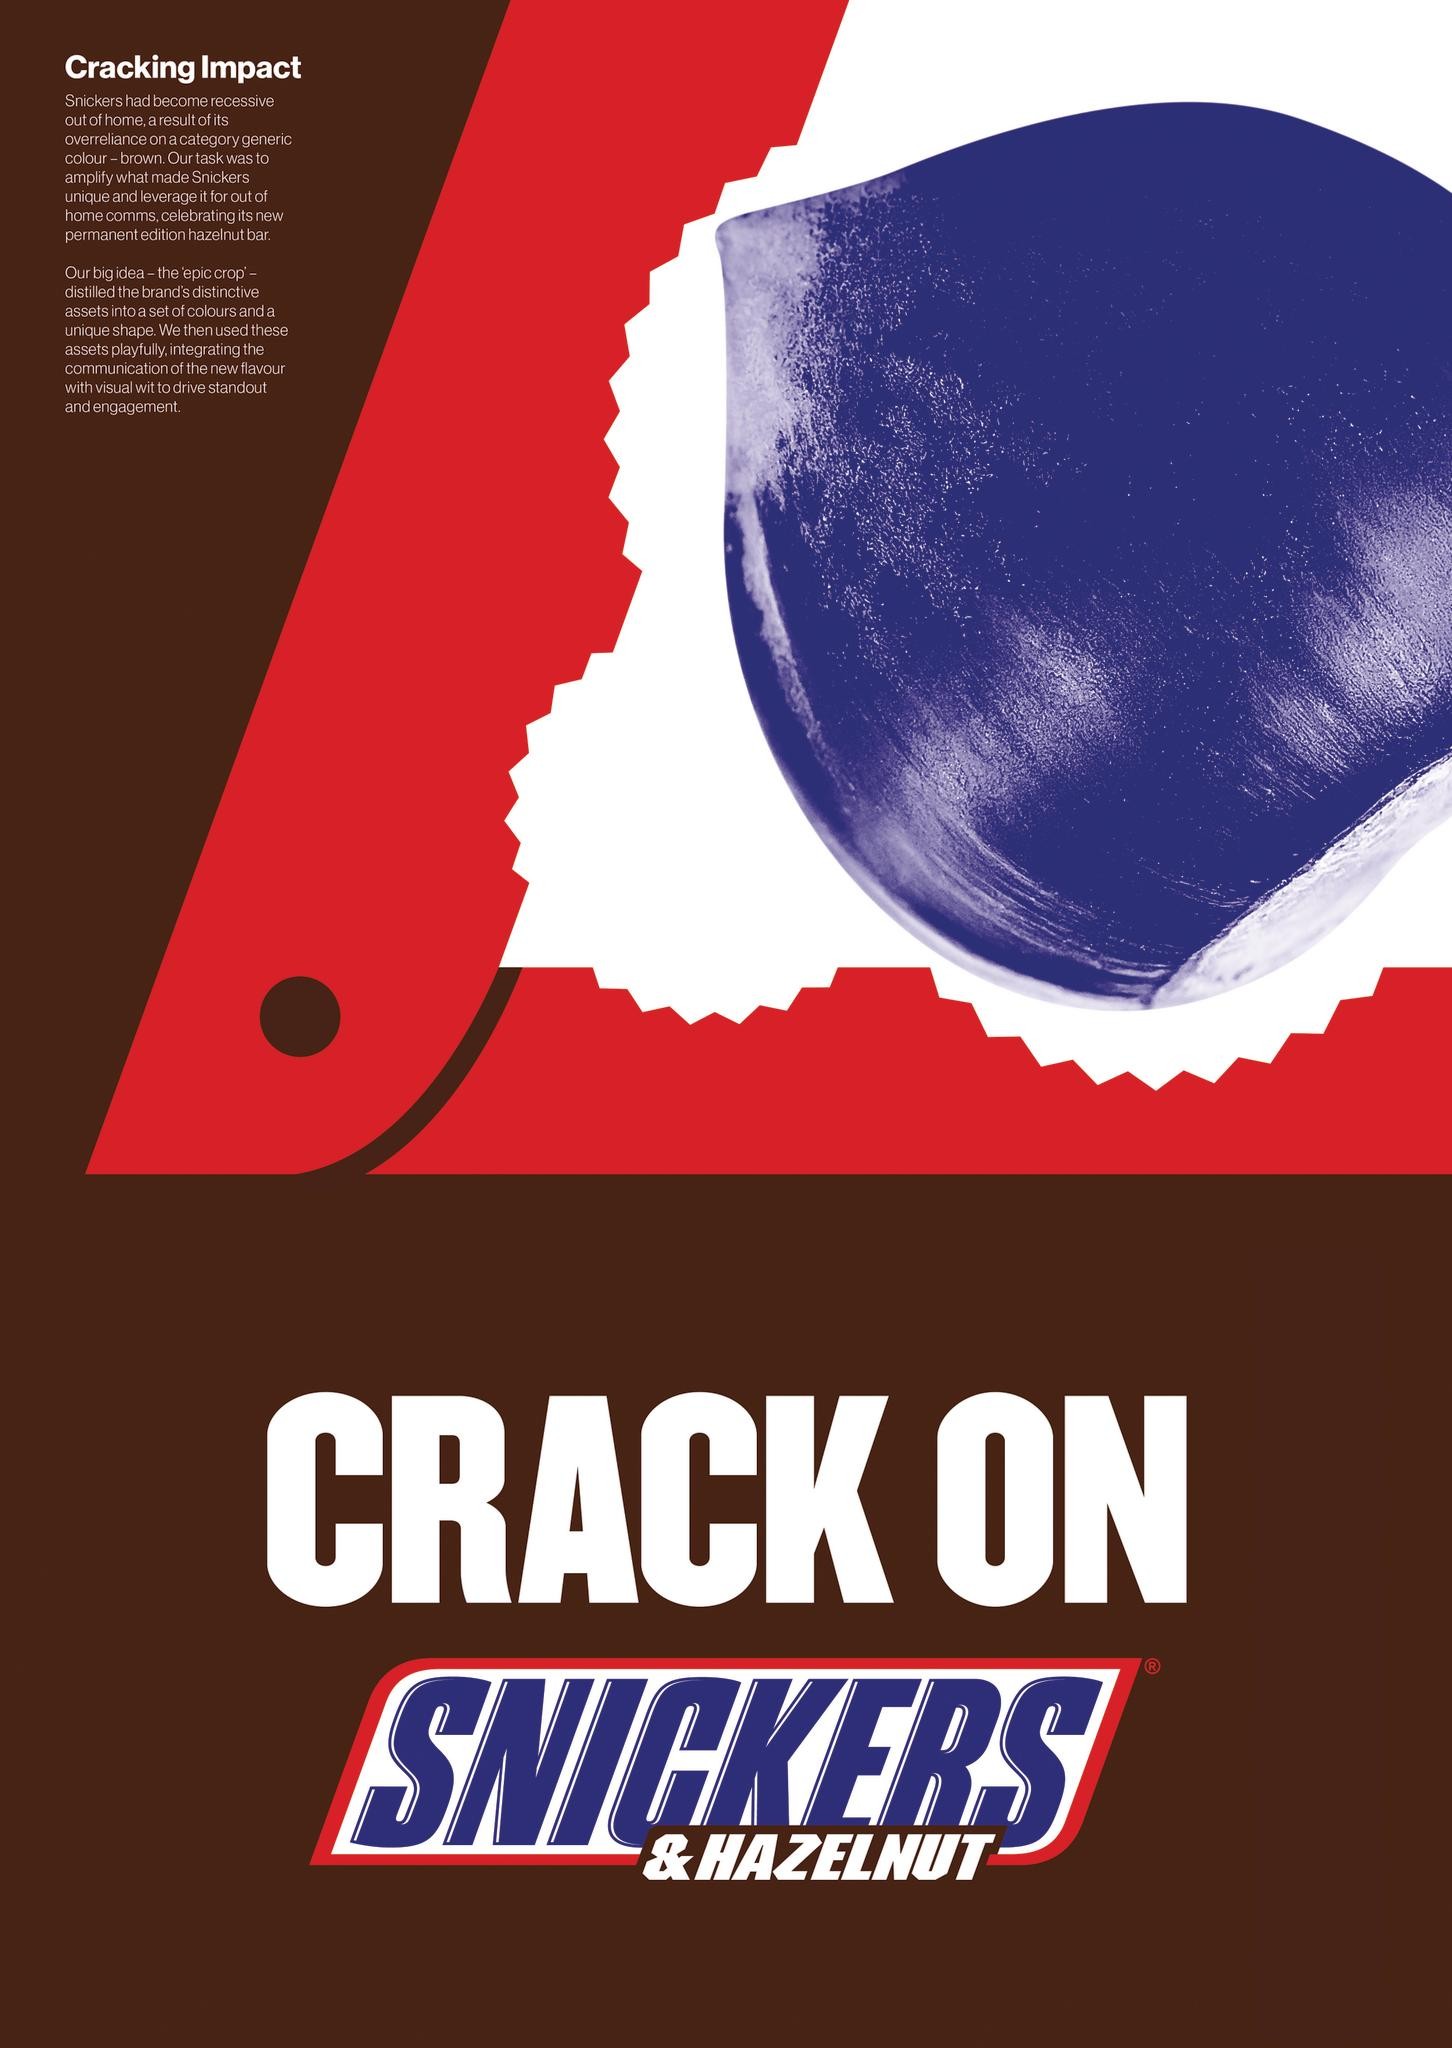 Snickers: Cracking impact